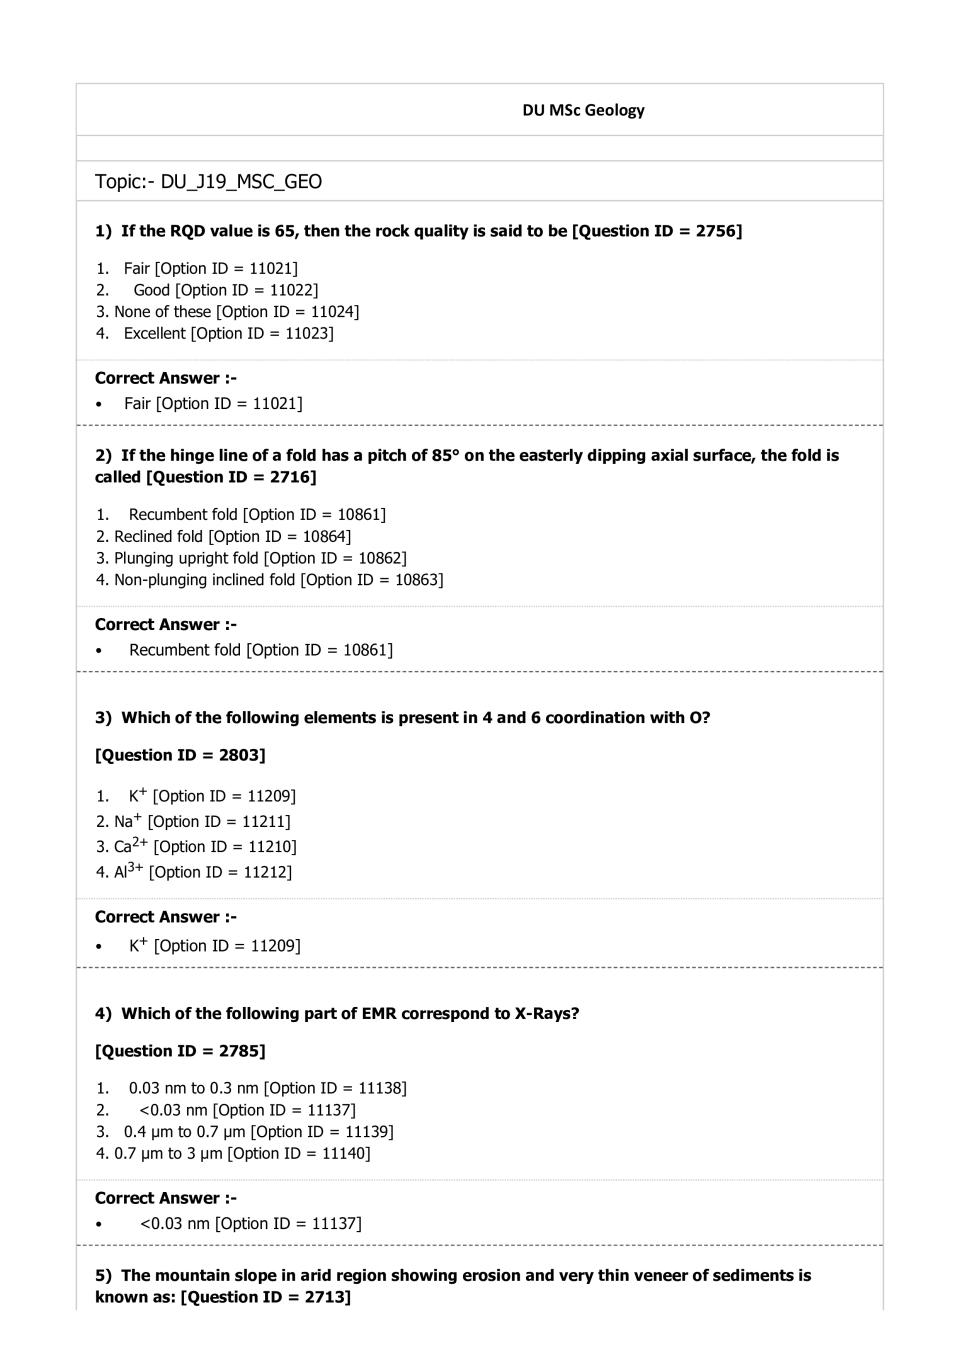 DUET Question Paper 2019 for M.Sc Geology - Page 1